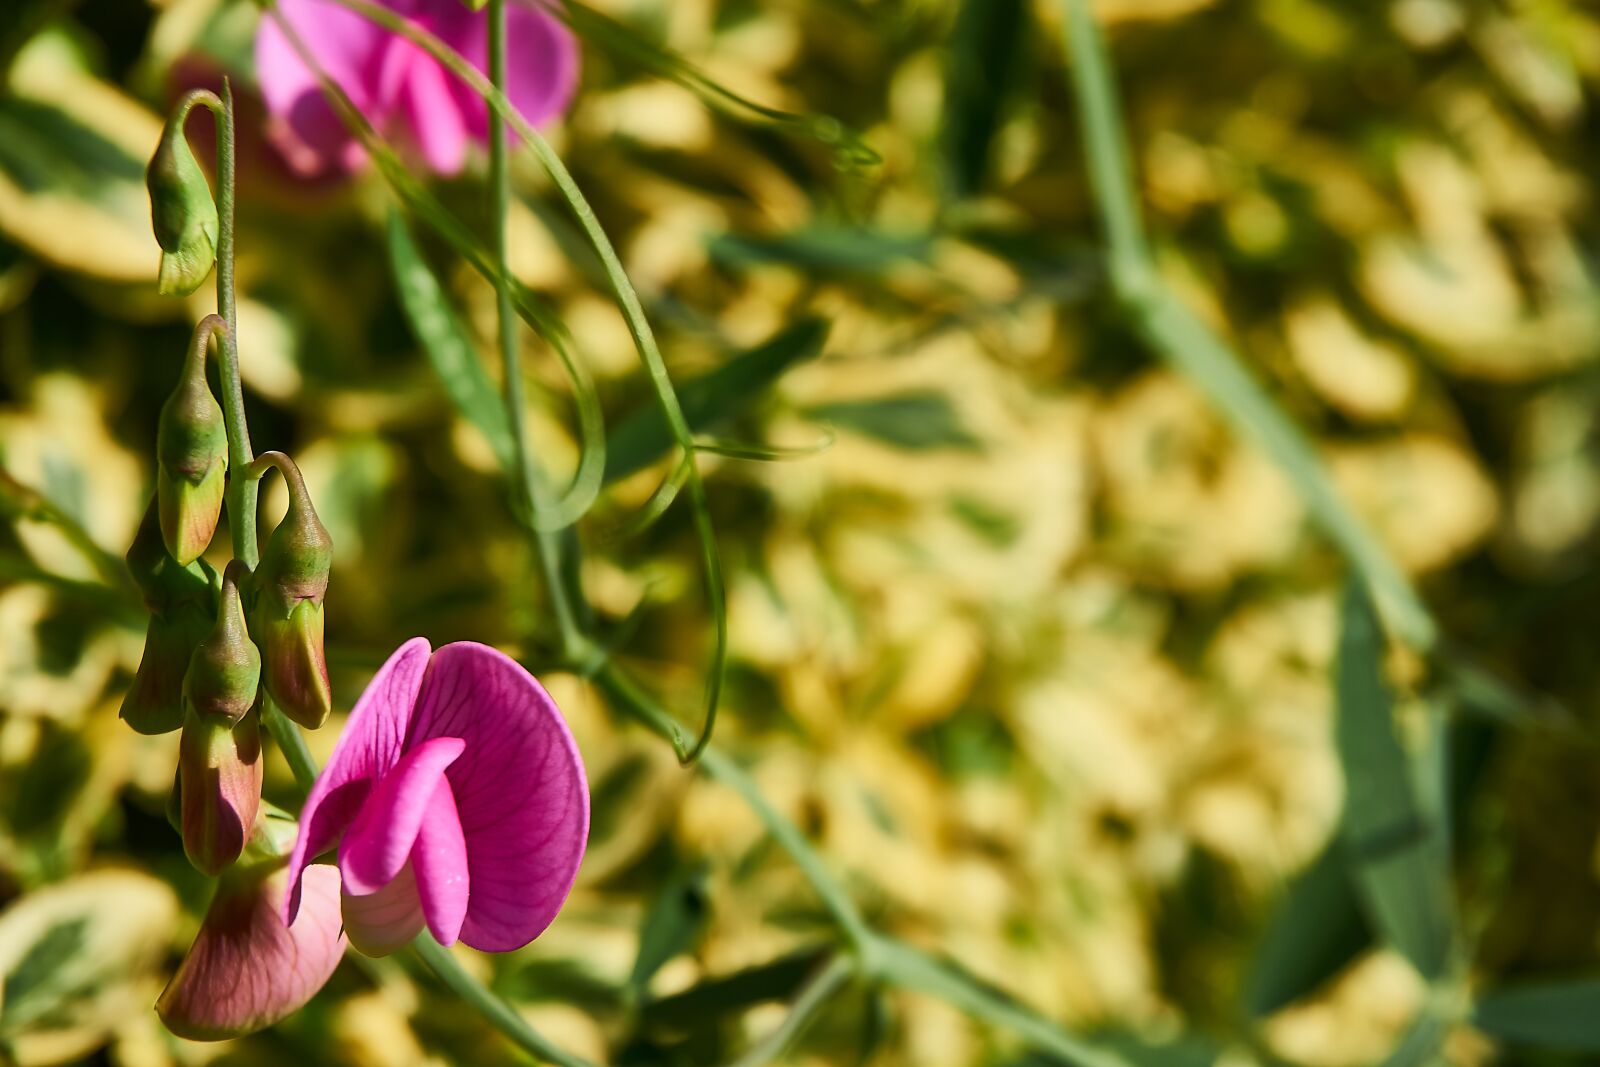 Sony a6000 + Sony E PZ 16-50 mm F3.5-5.6 OSS (SELP1650) sample photo. Lathyrus latifolius, pink pearl photography